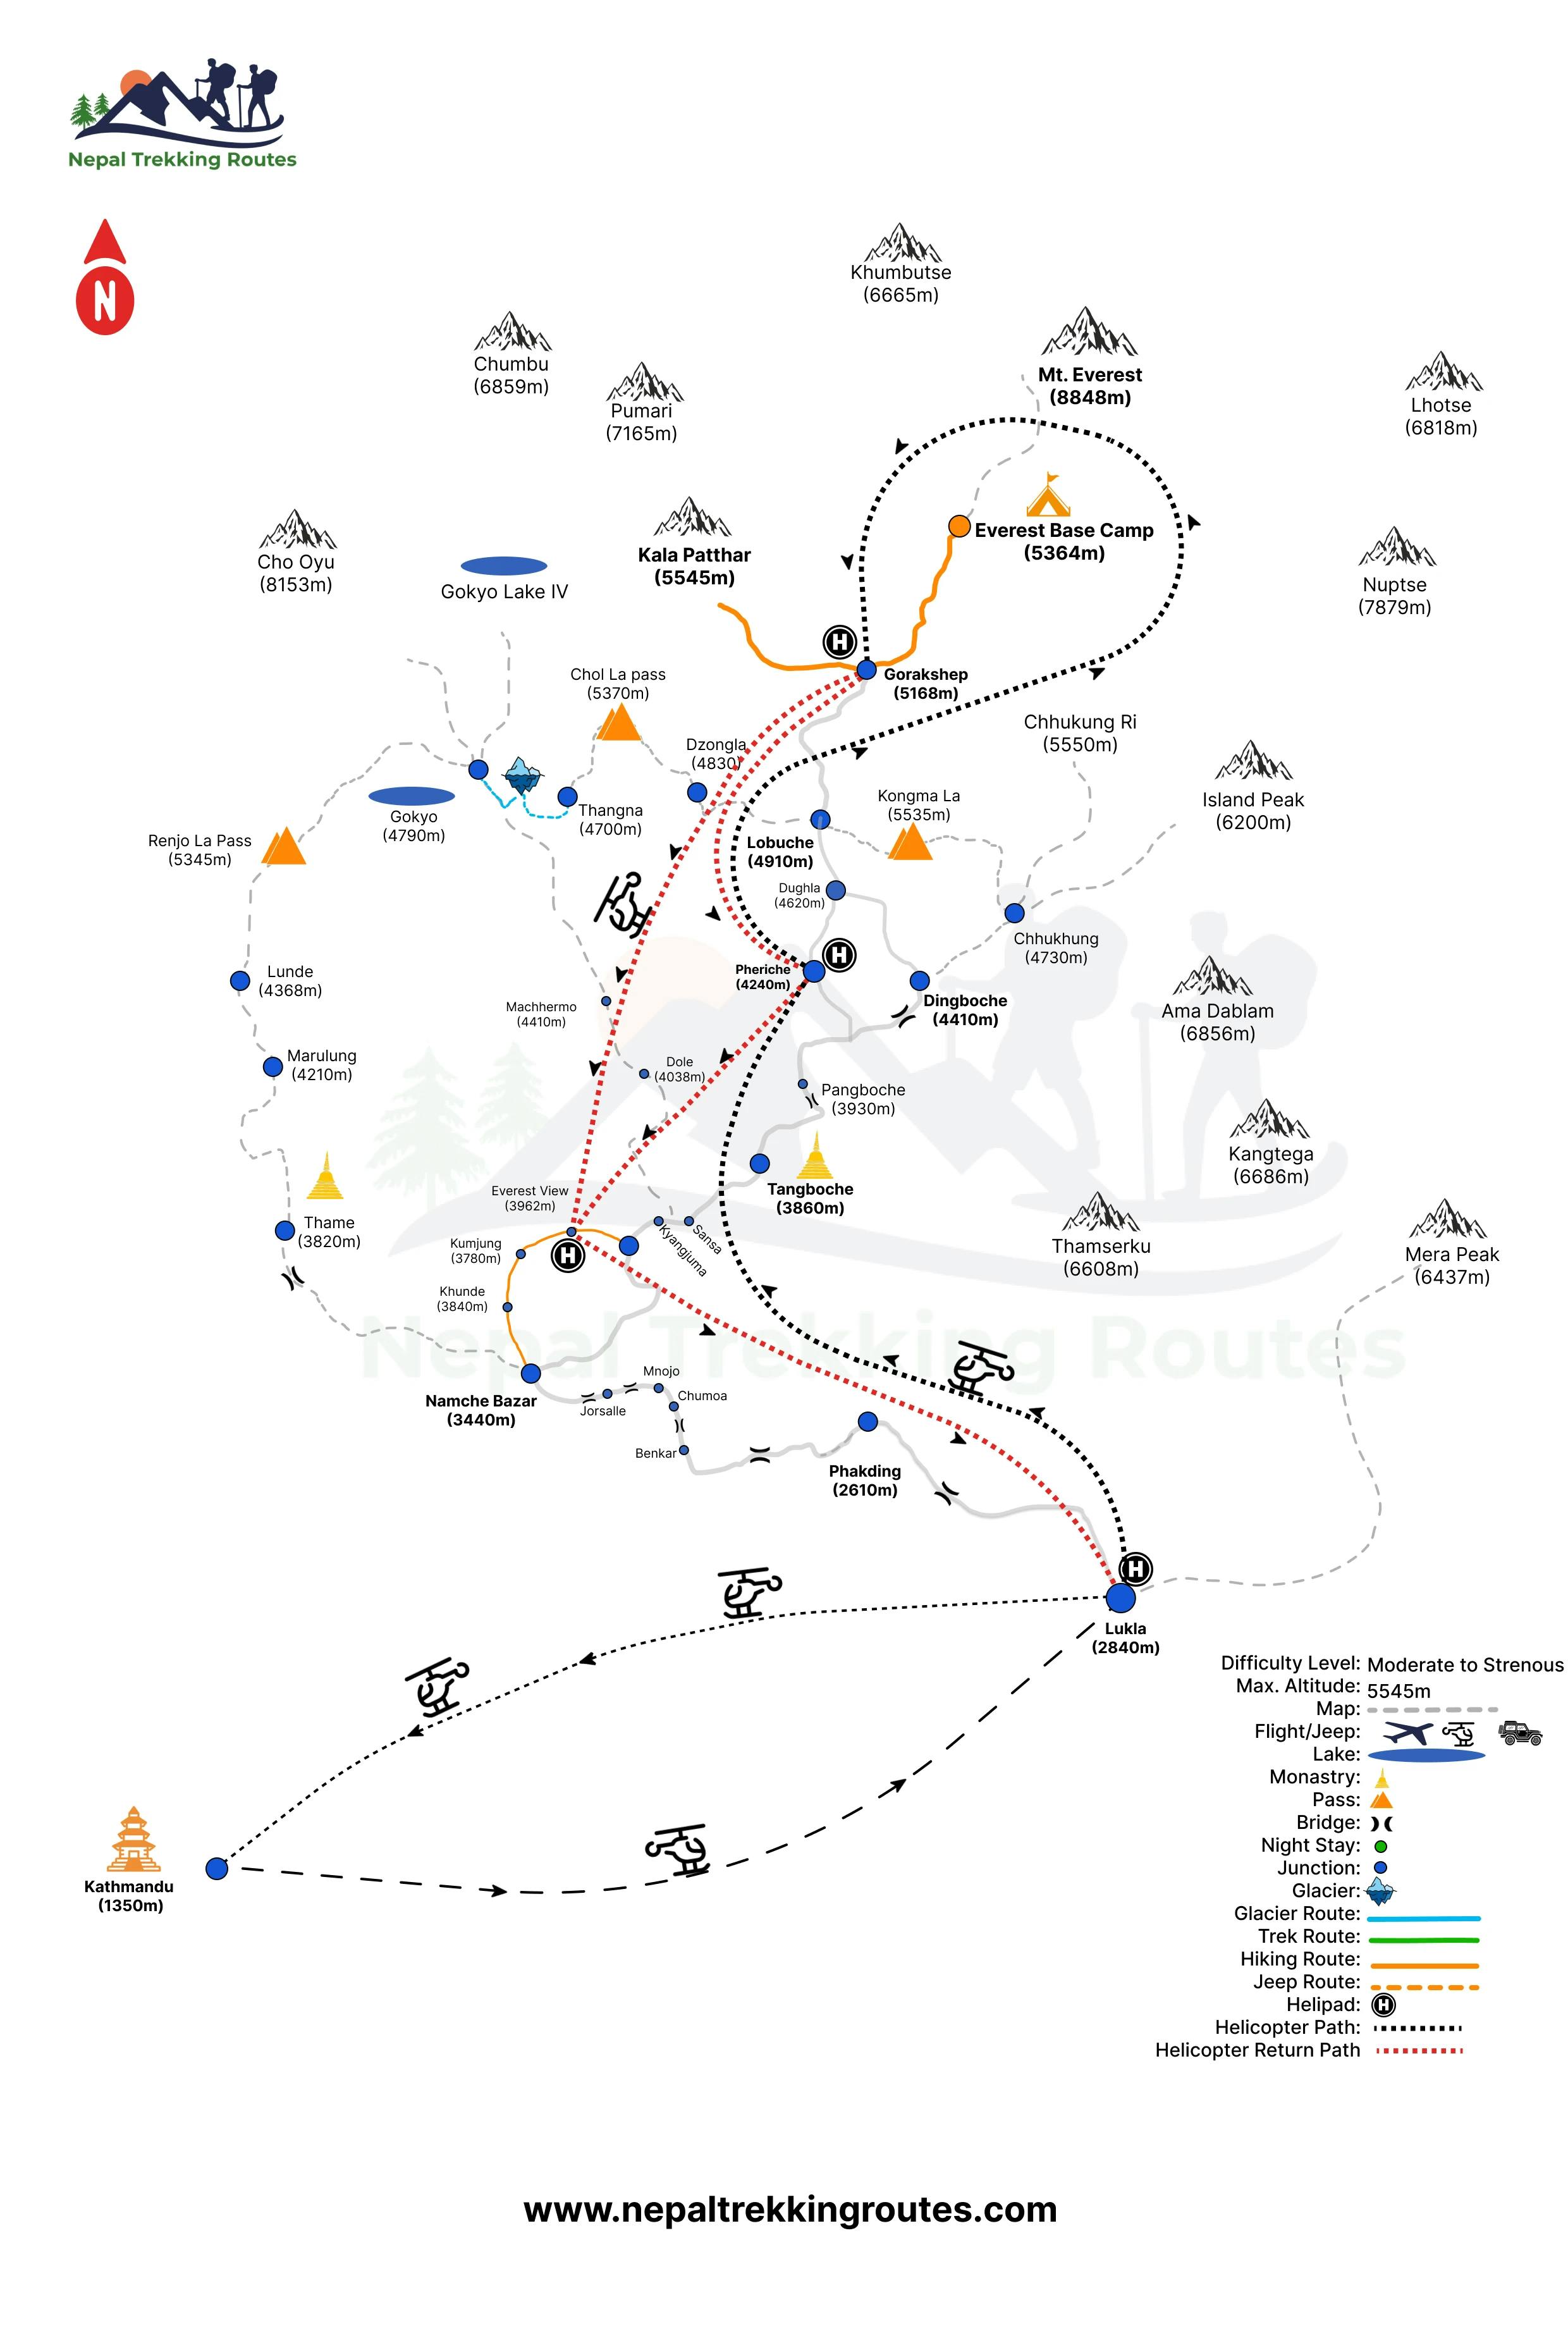 Everest Base Camp Helicopter Tour Map